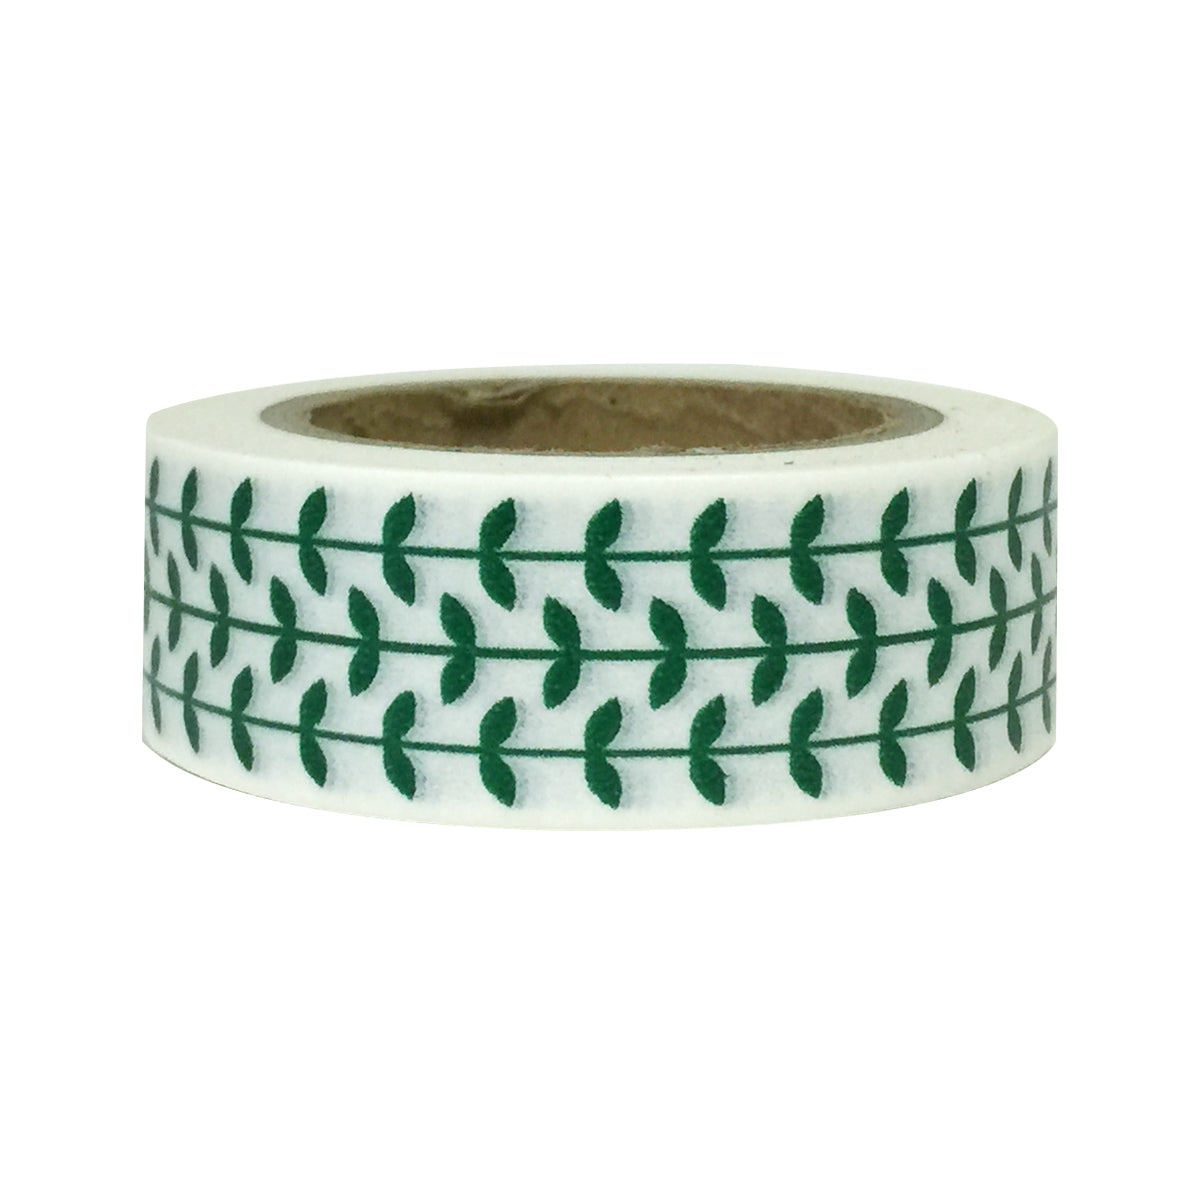 Wrapables Washi Masking Tape, Green and Gold Group